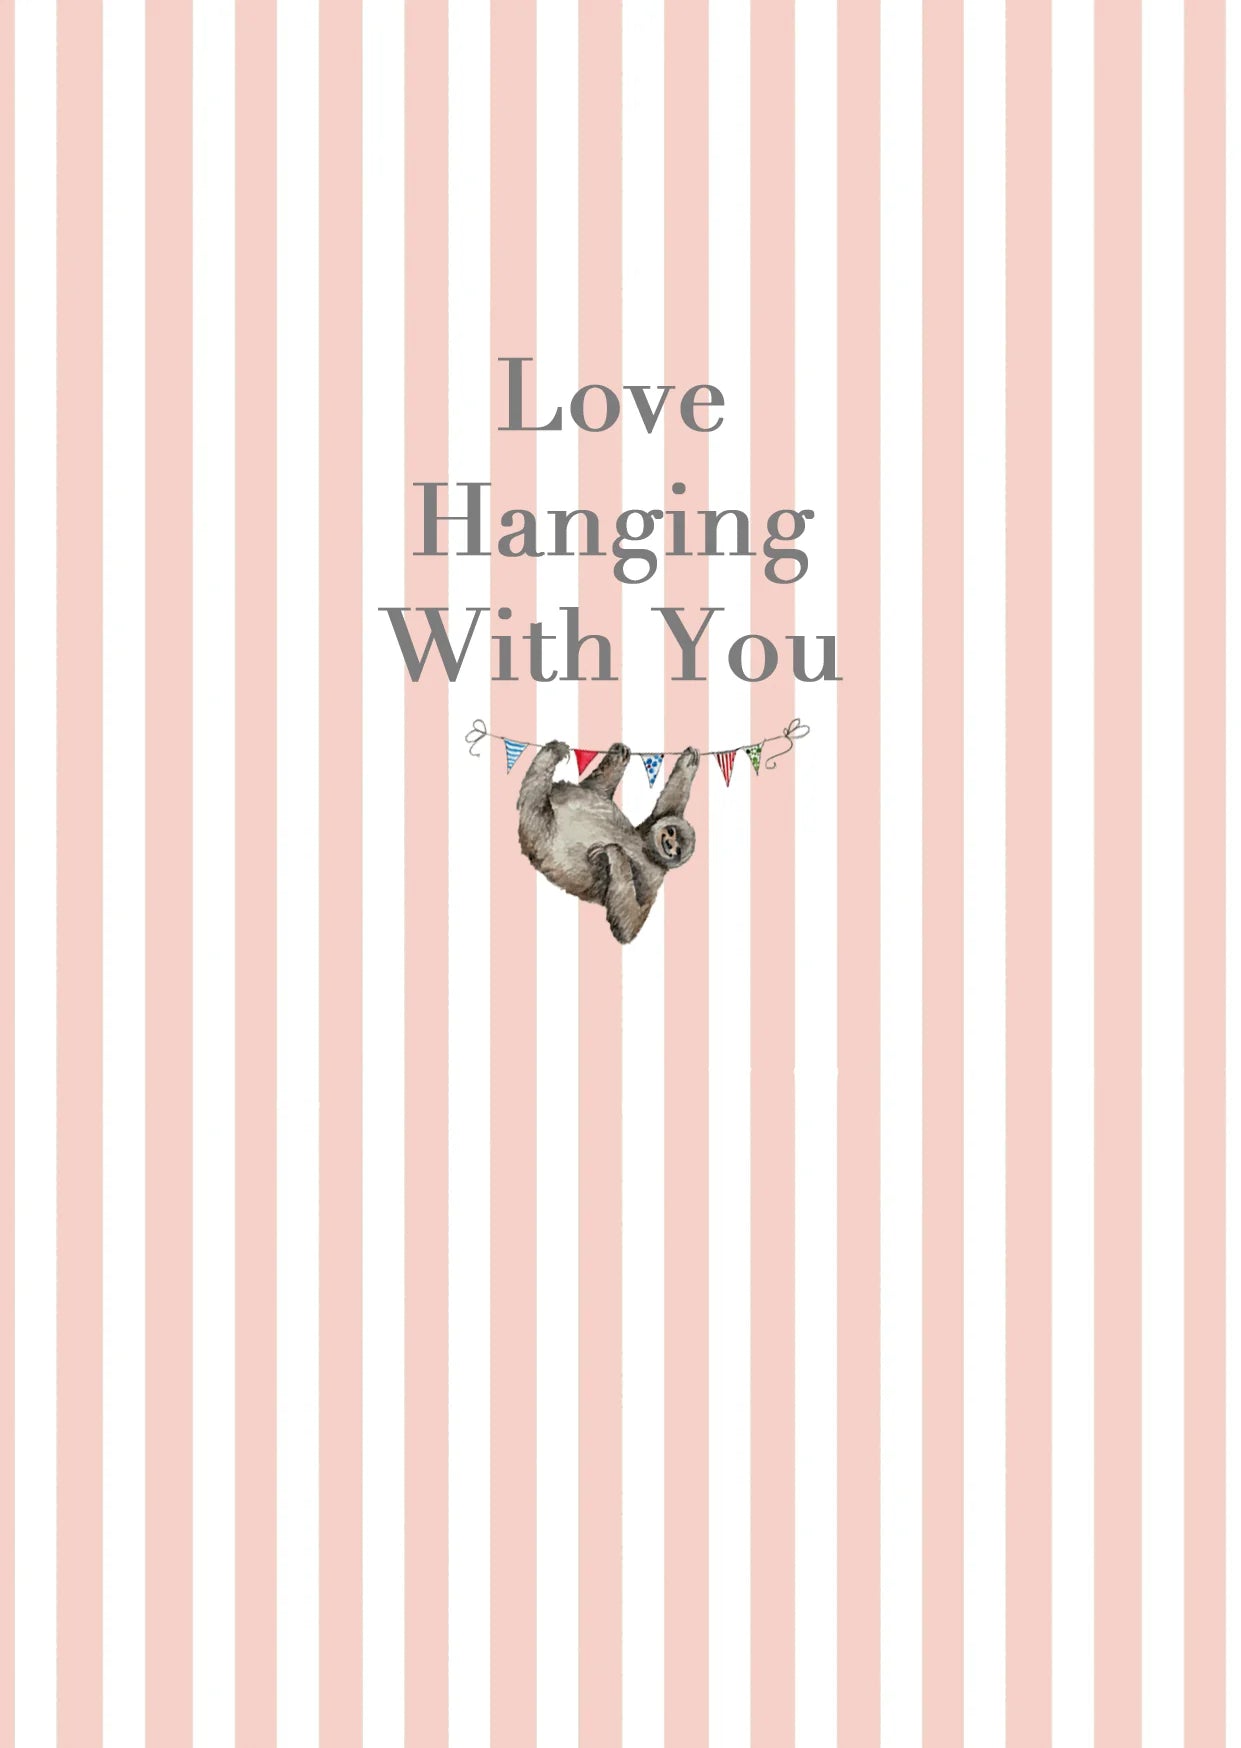 Fabulous Gifts Crumble & Core Keepsake Sloth Love Hanging Card by Weirs of Baggot Street